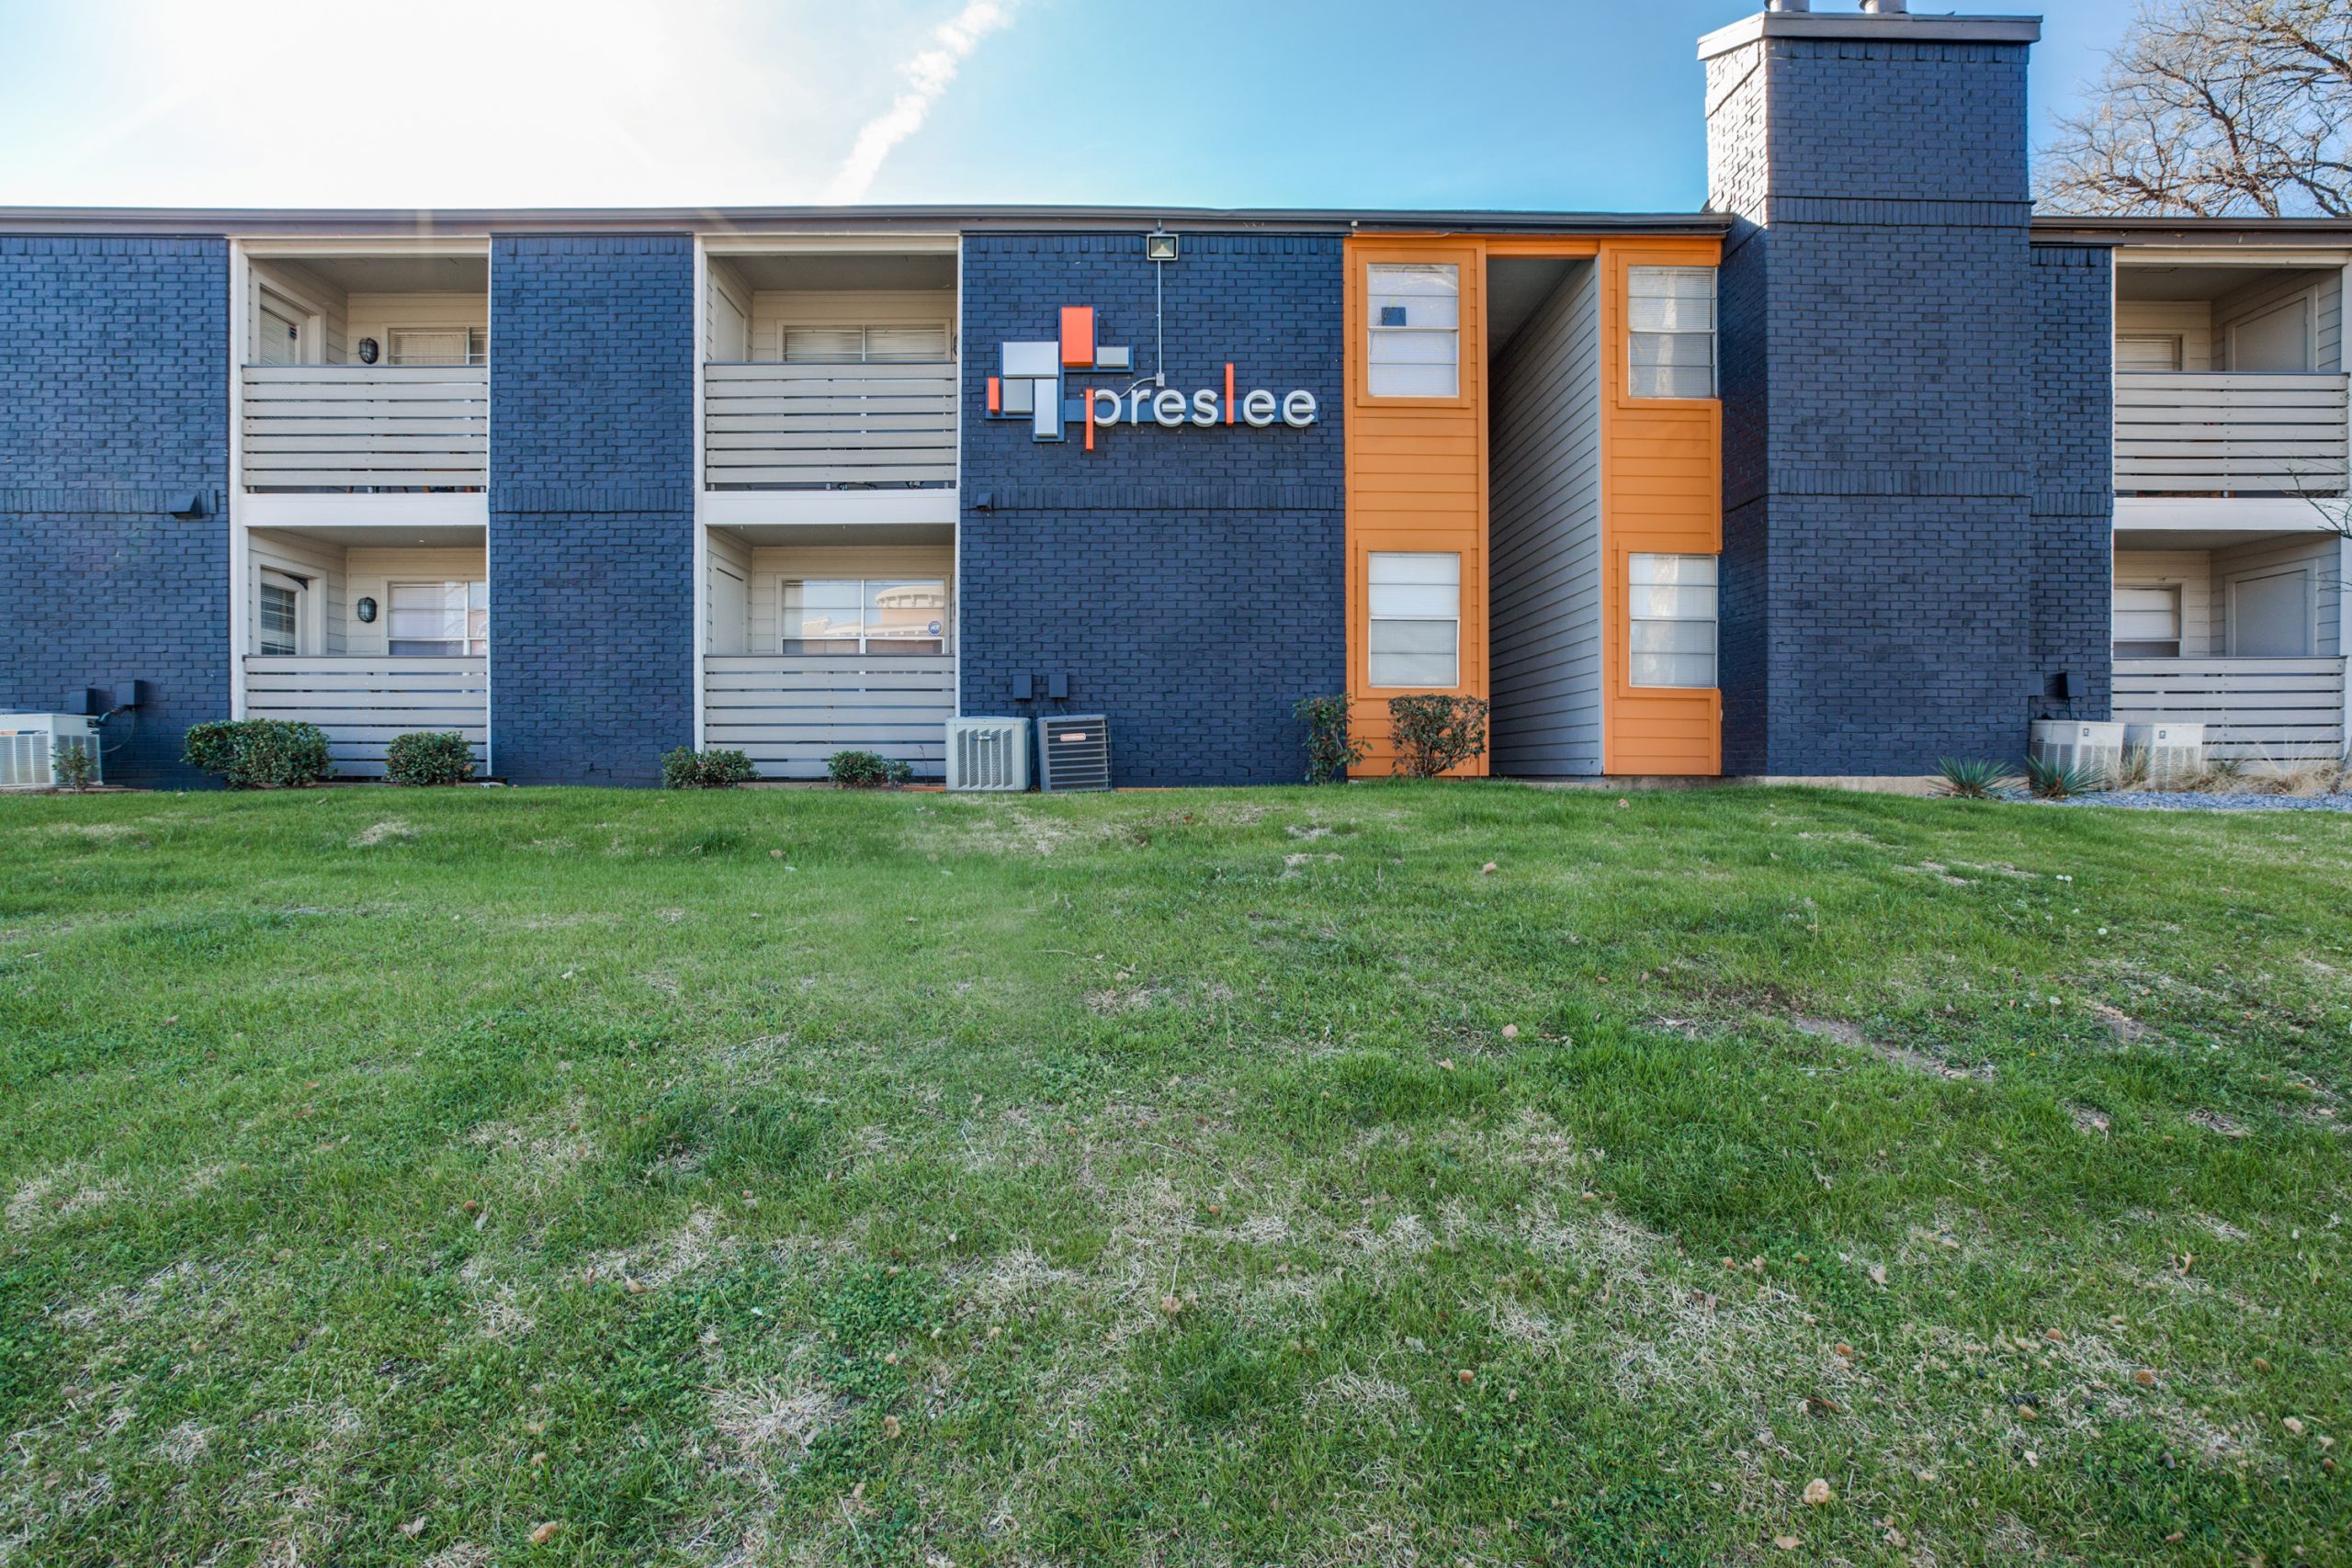 the exterior of an apartment building with blue and orange accents at The Preslee